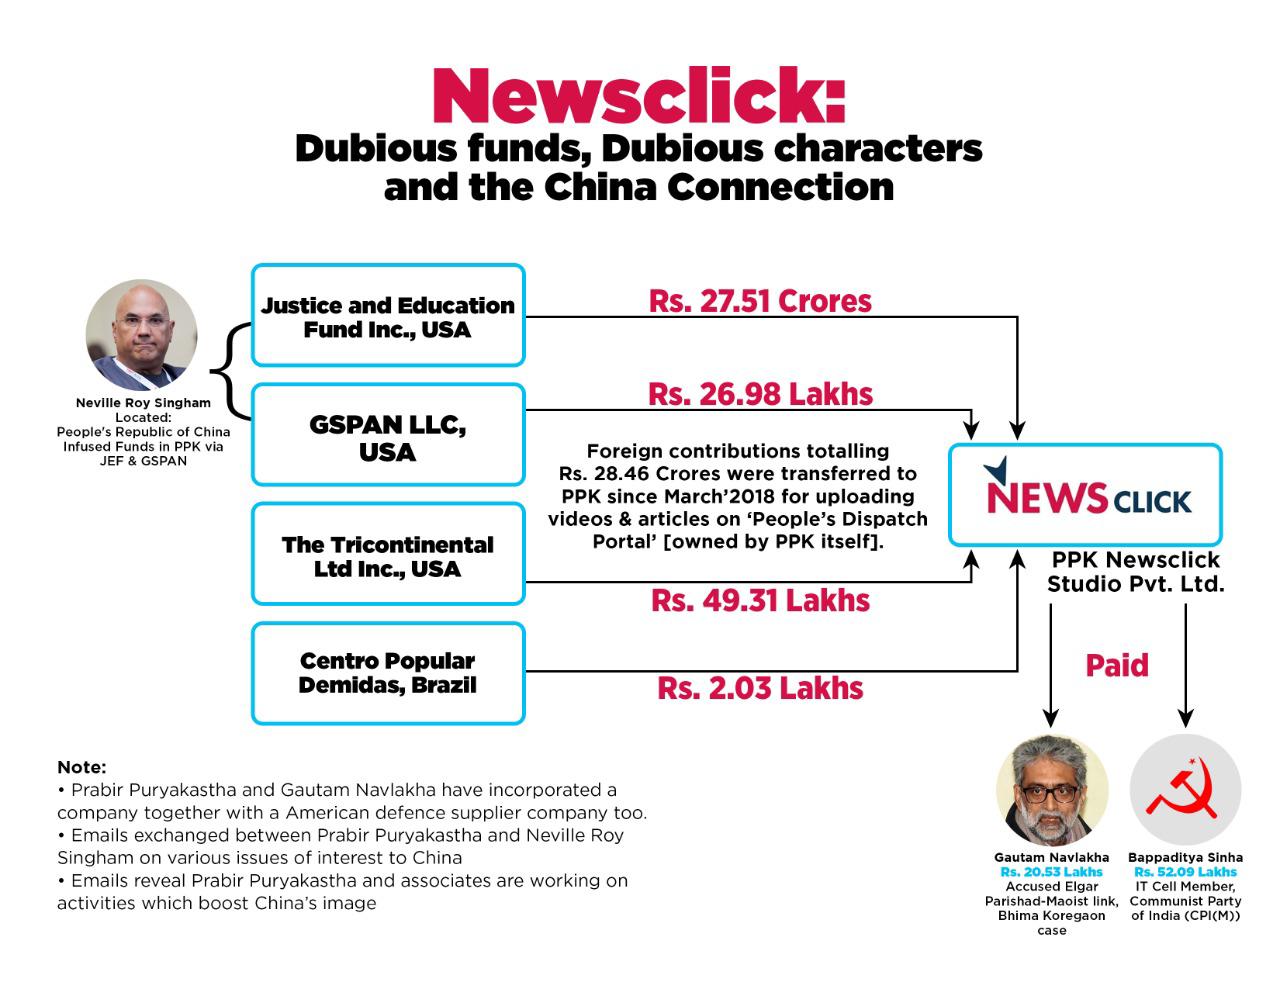 Enforcement Directorate probe reveals Newsclick got funds from businessman 'linked' to China regime